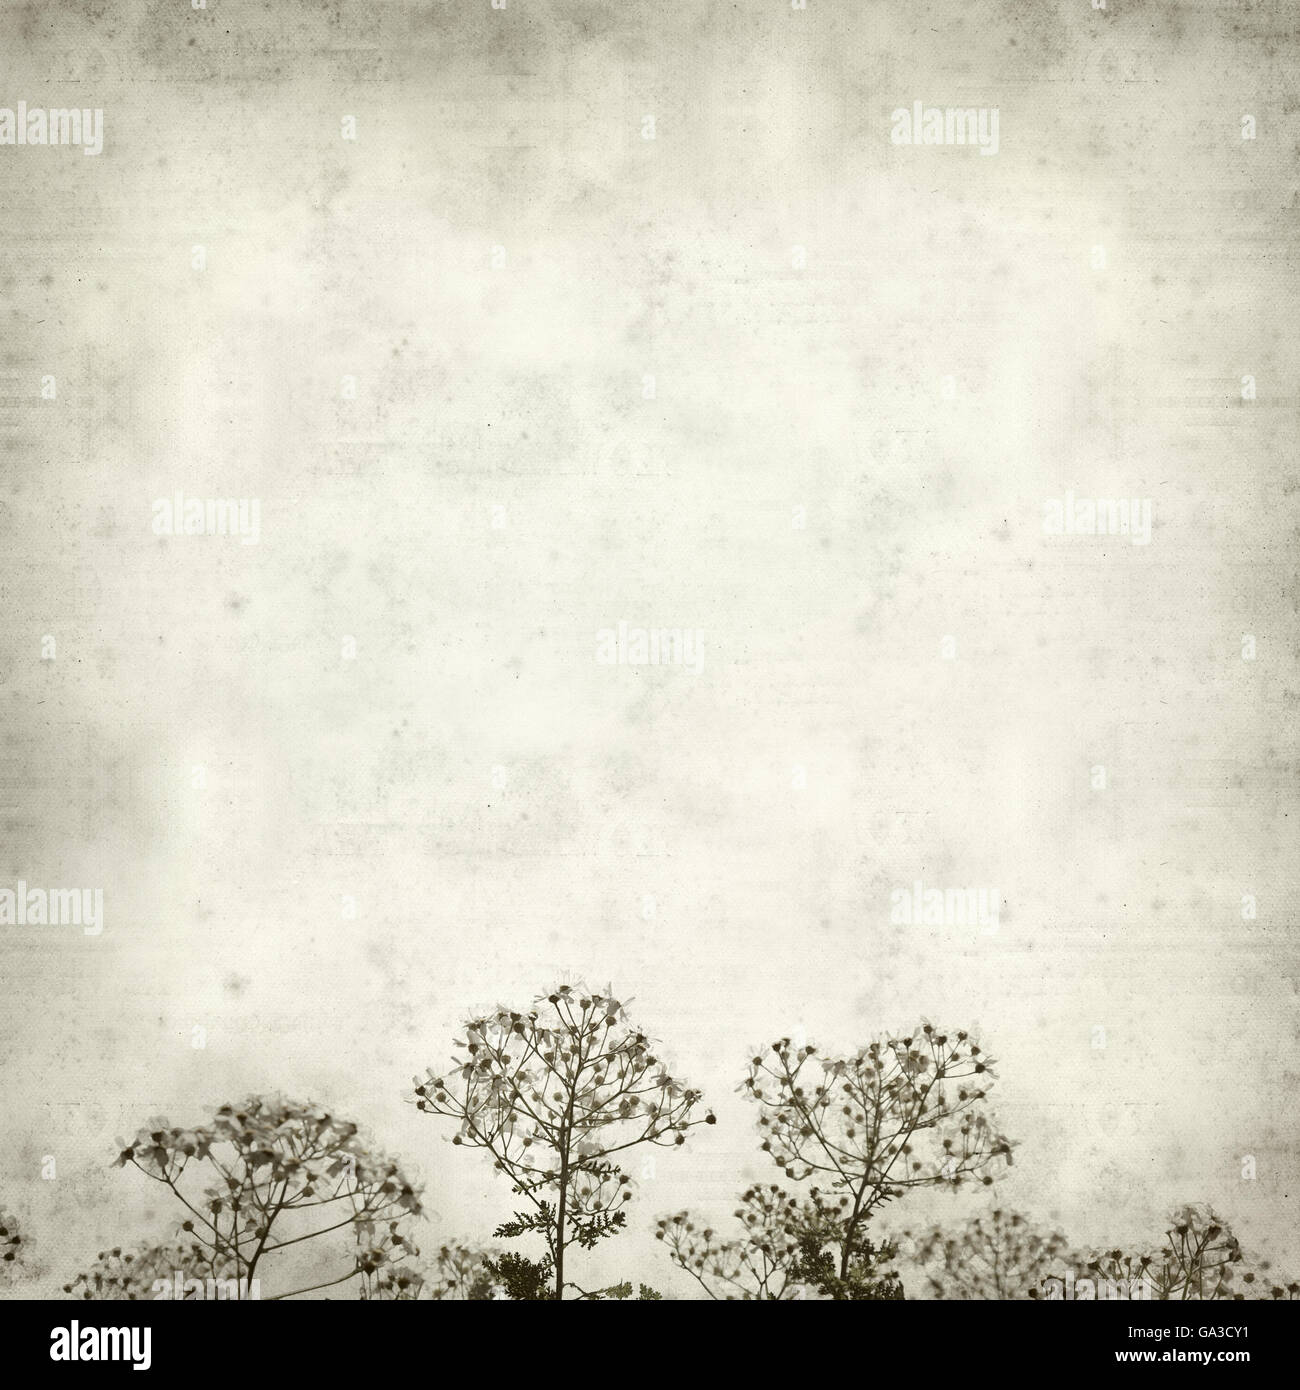 textured old paper background with silver leaf plant Stock Photo